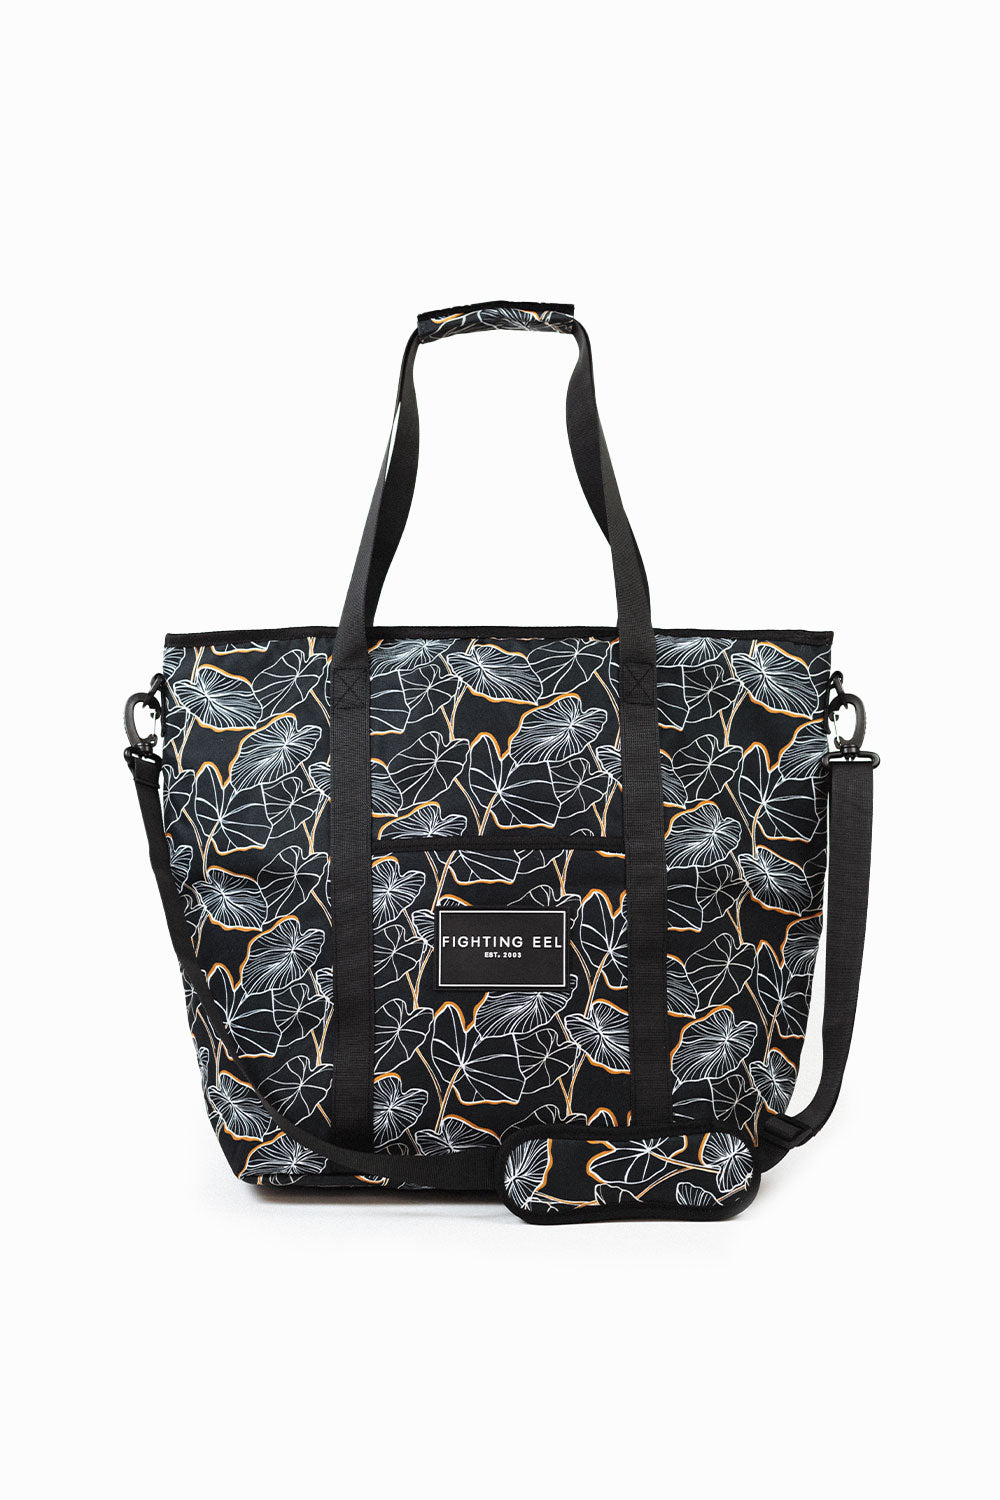 Cooler Carryall - Toffee Fish – Fighting Eel